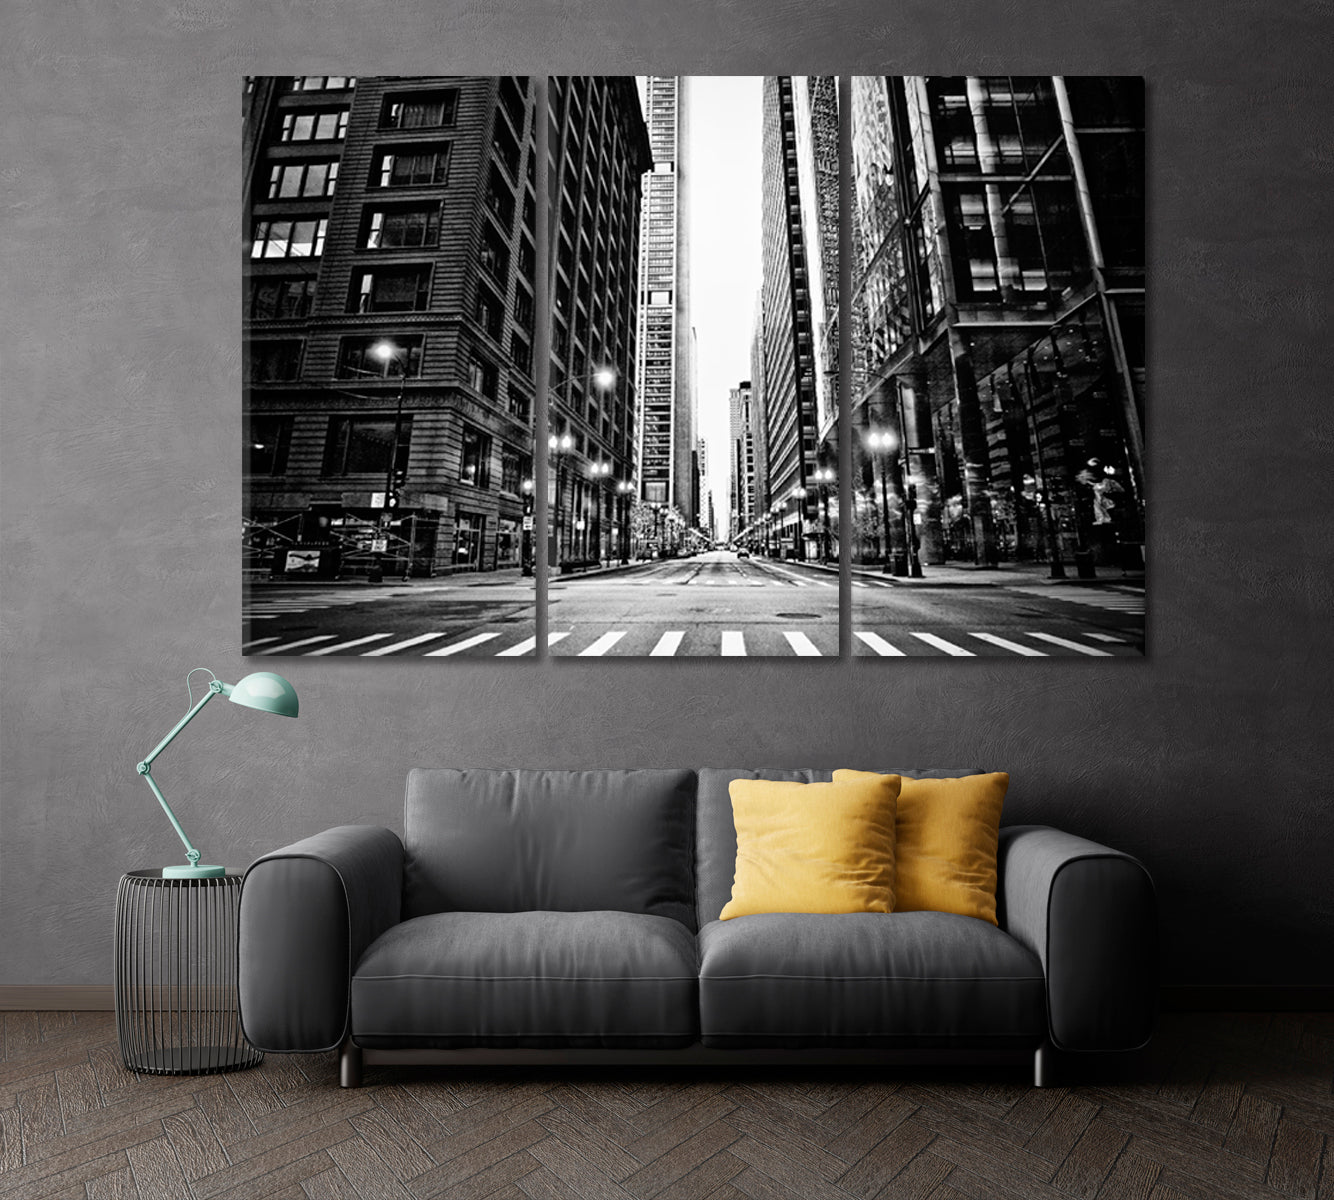 Chicago Street in Black and White Canvas Print ArtLexy 3 Panels 36"x24" inches 